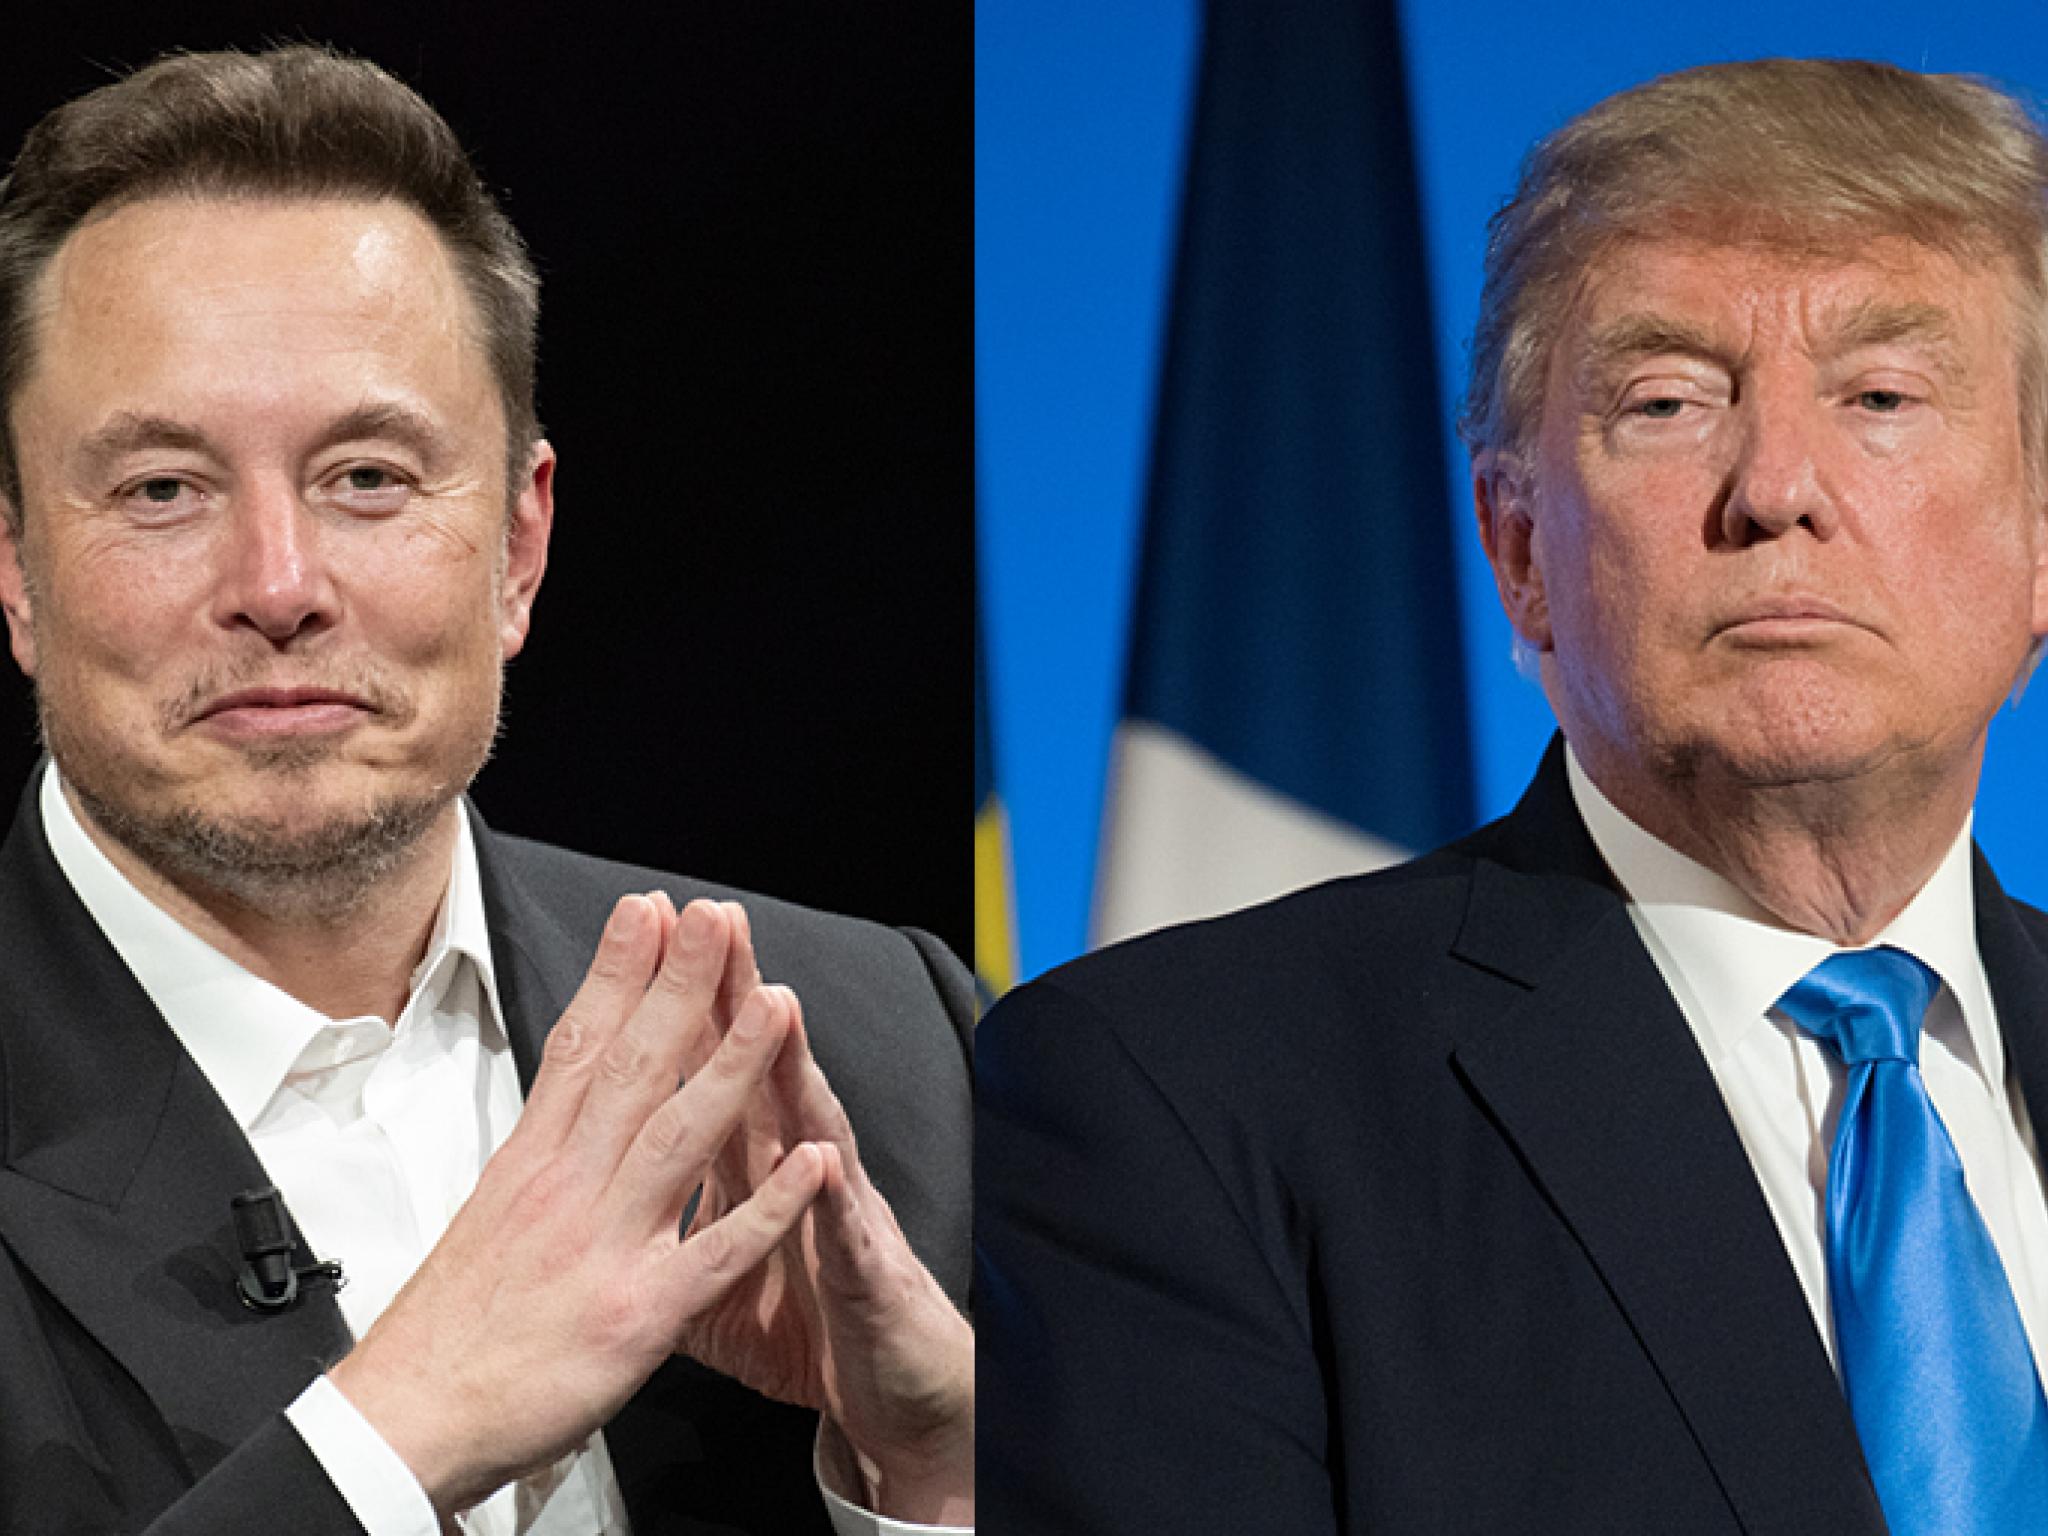  tesla-bull-says-trump-win-is-negative-for-ev-industry-but-potential-positive-for-elon-musk-led-company-heres-why 